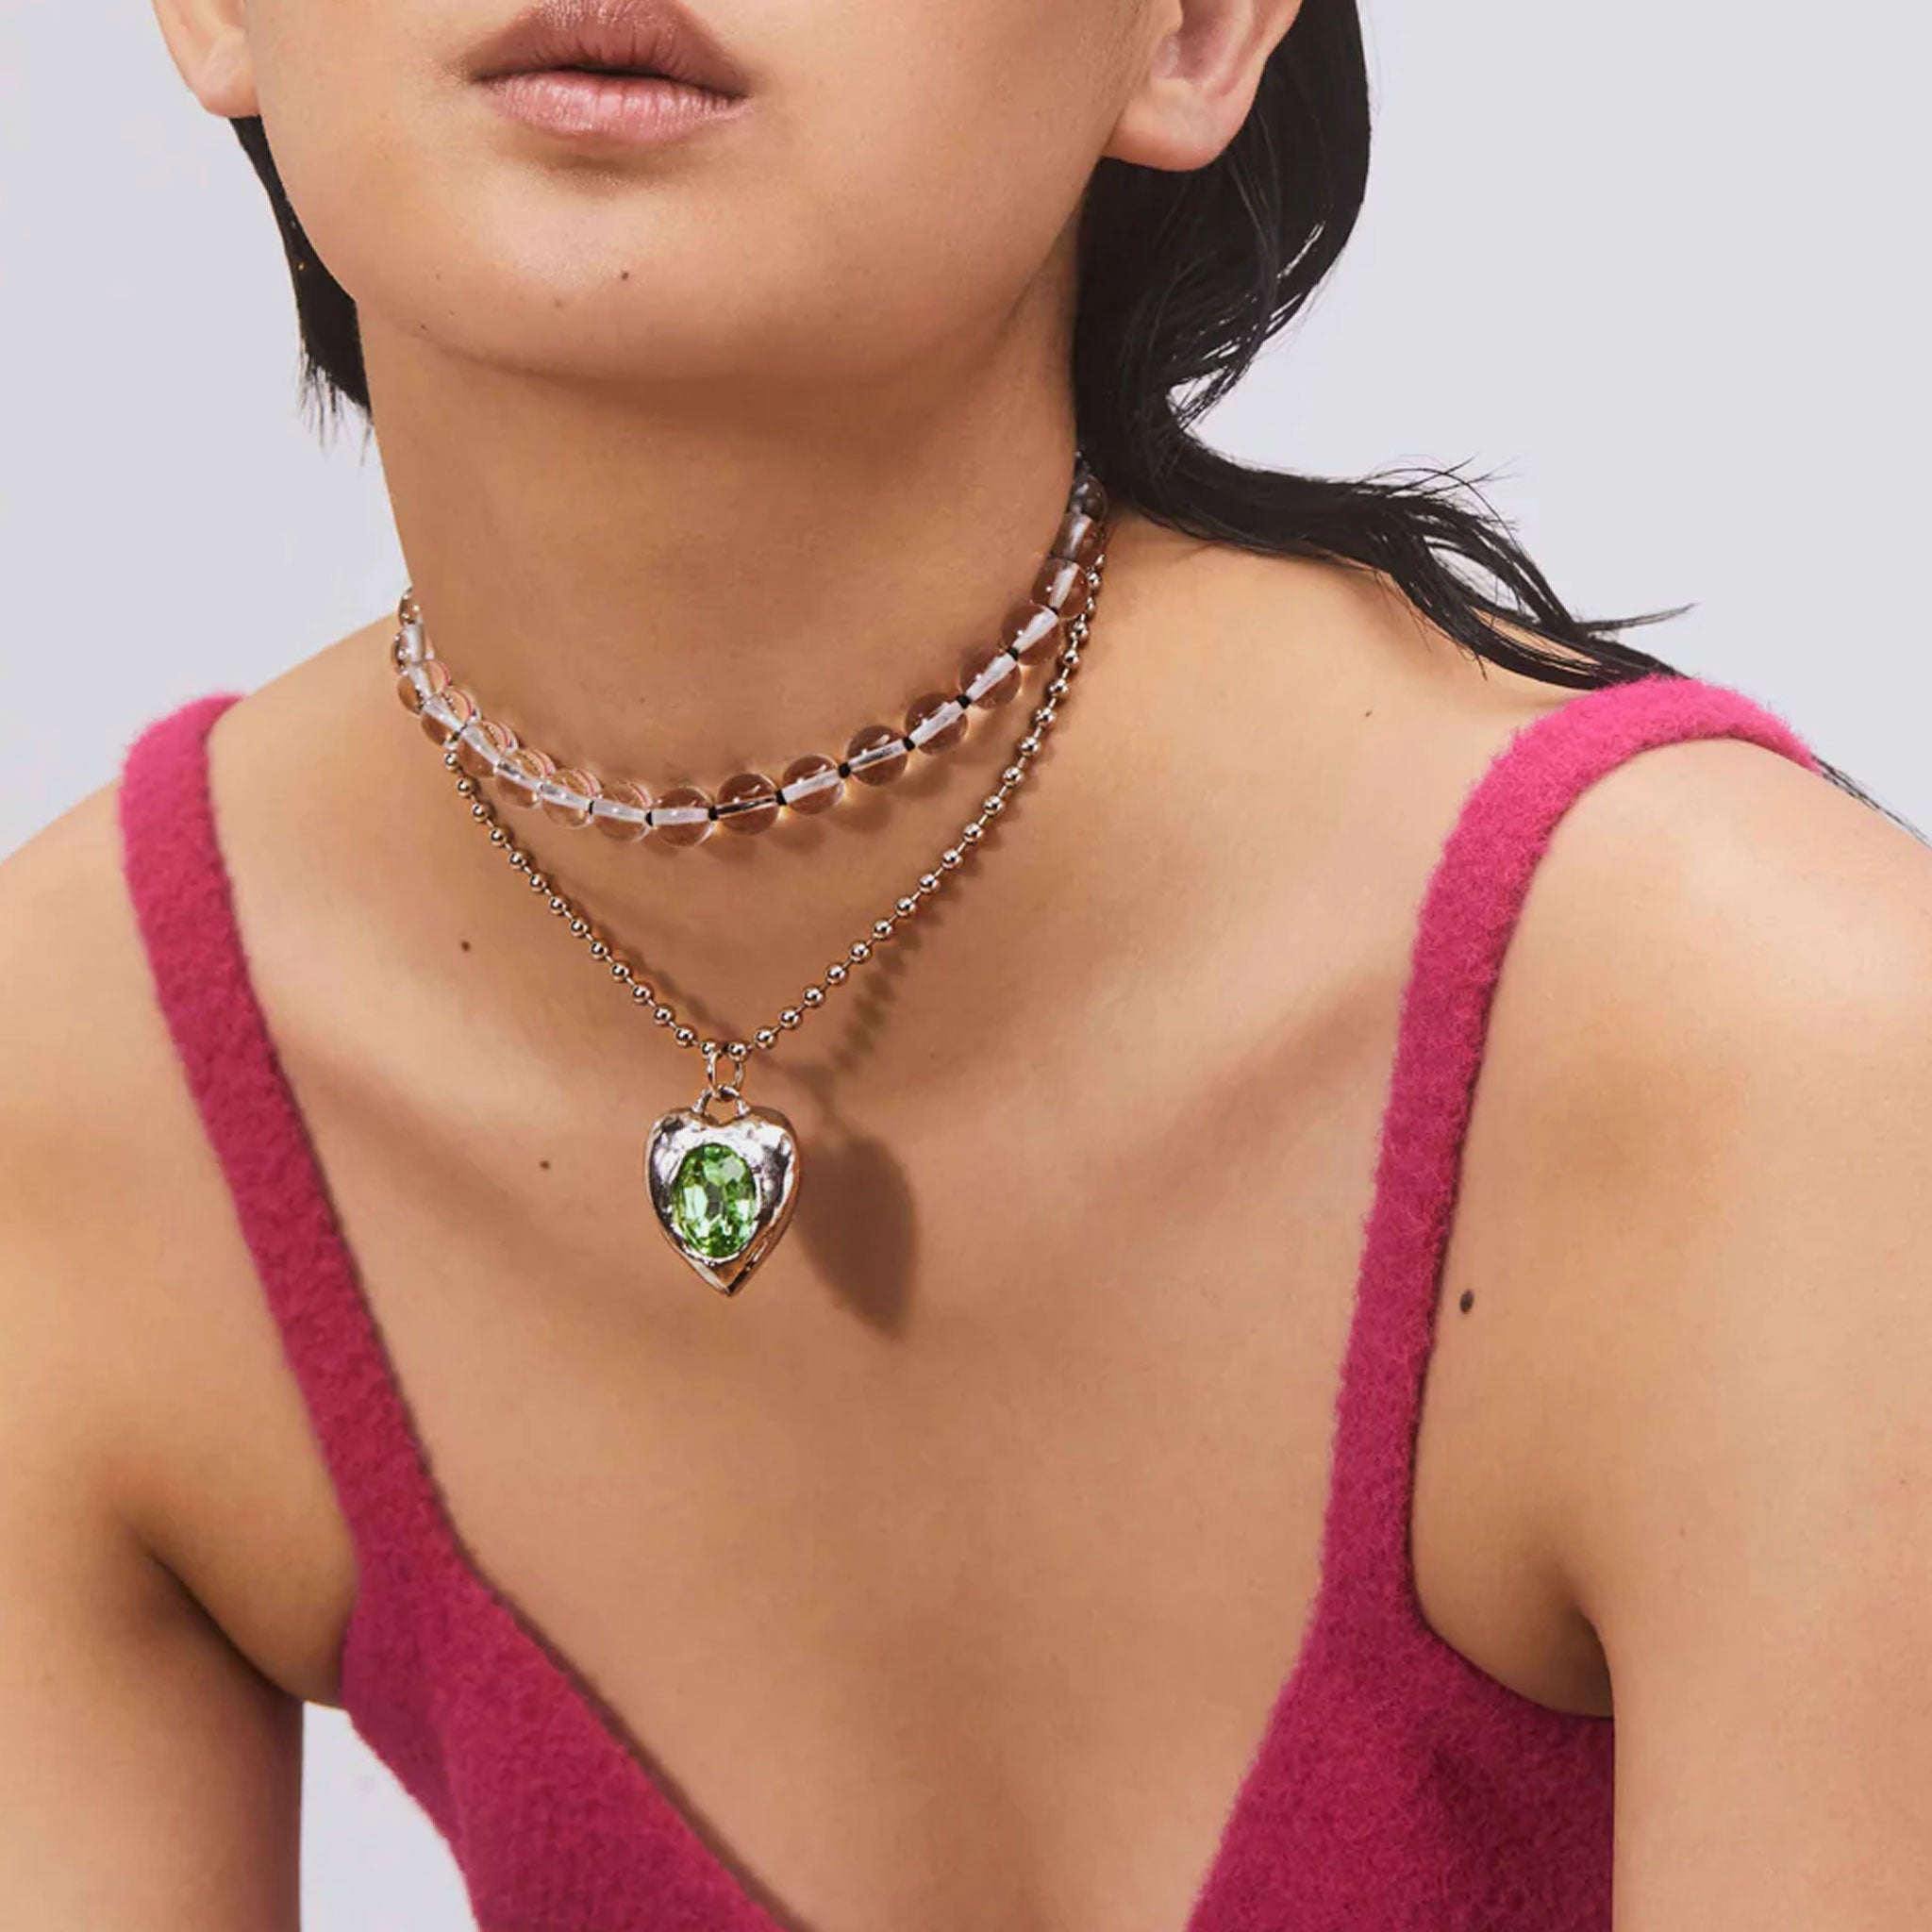 A model wears the Pacha Necklace - a silver-toned roughly shaped heart pendant necklace featuring a clear green stone.